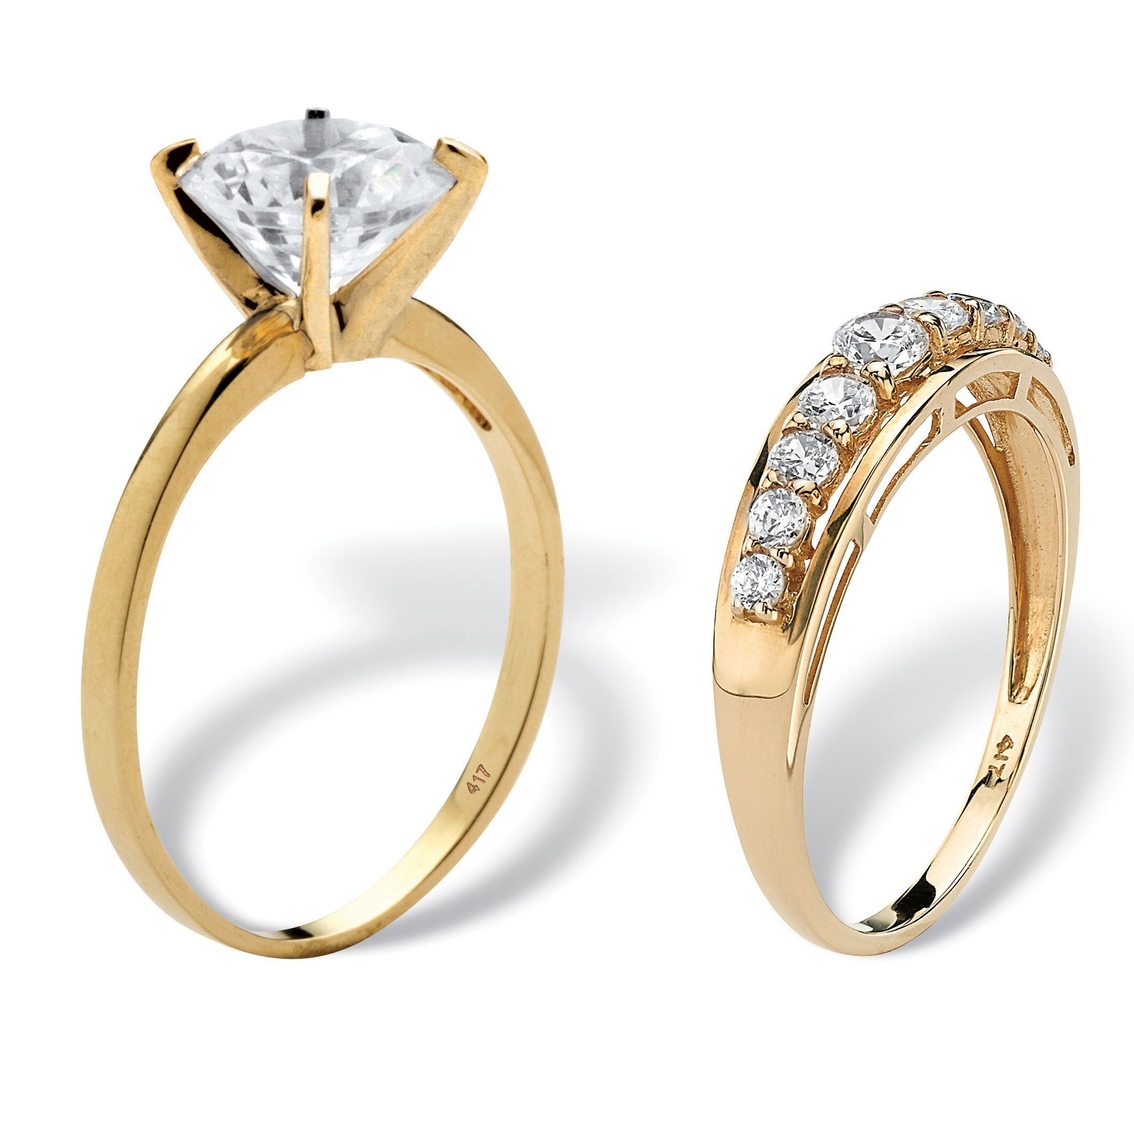 PalmBeach 2.93 Cttw. Cubic Zirconia Solid 10k Yellow Gold Wedding Ring Set - Image 2 of 5